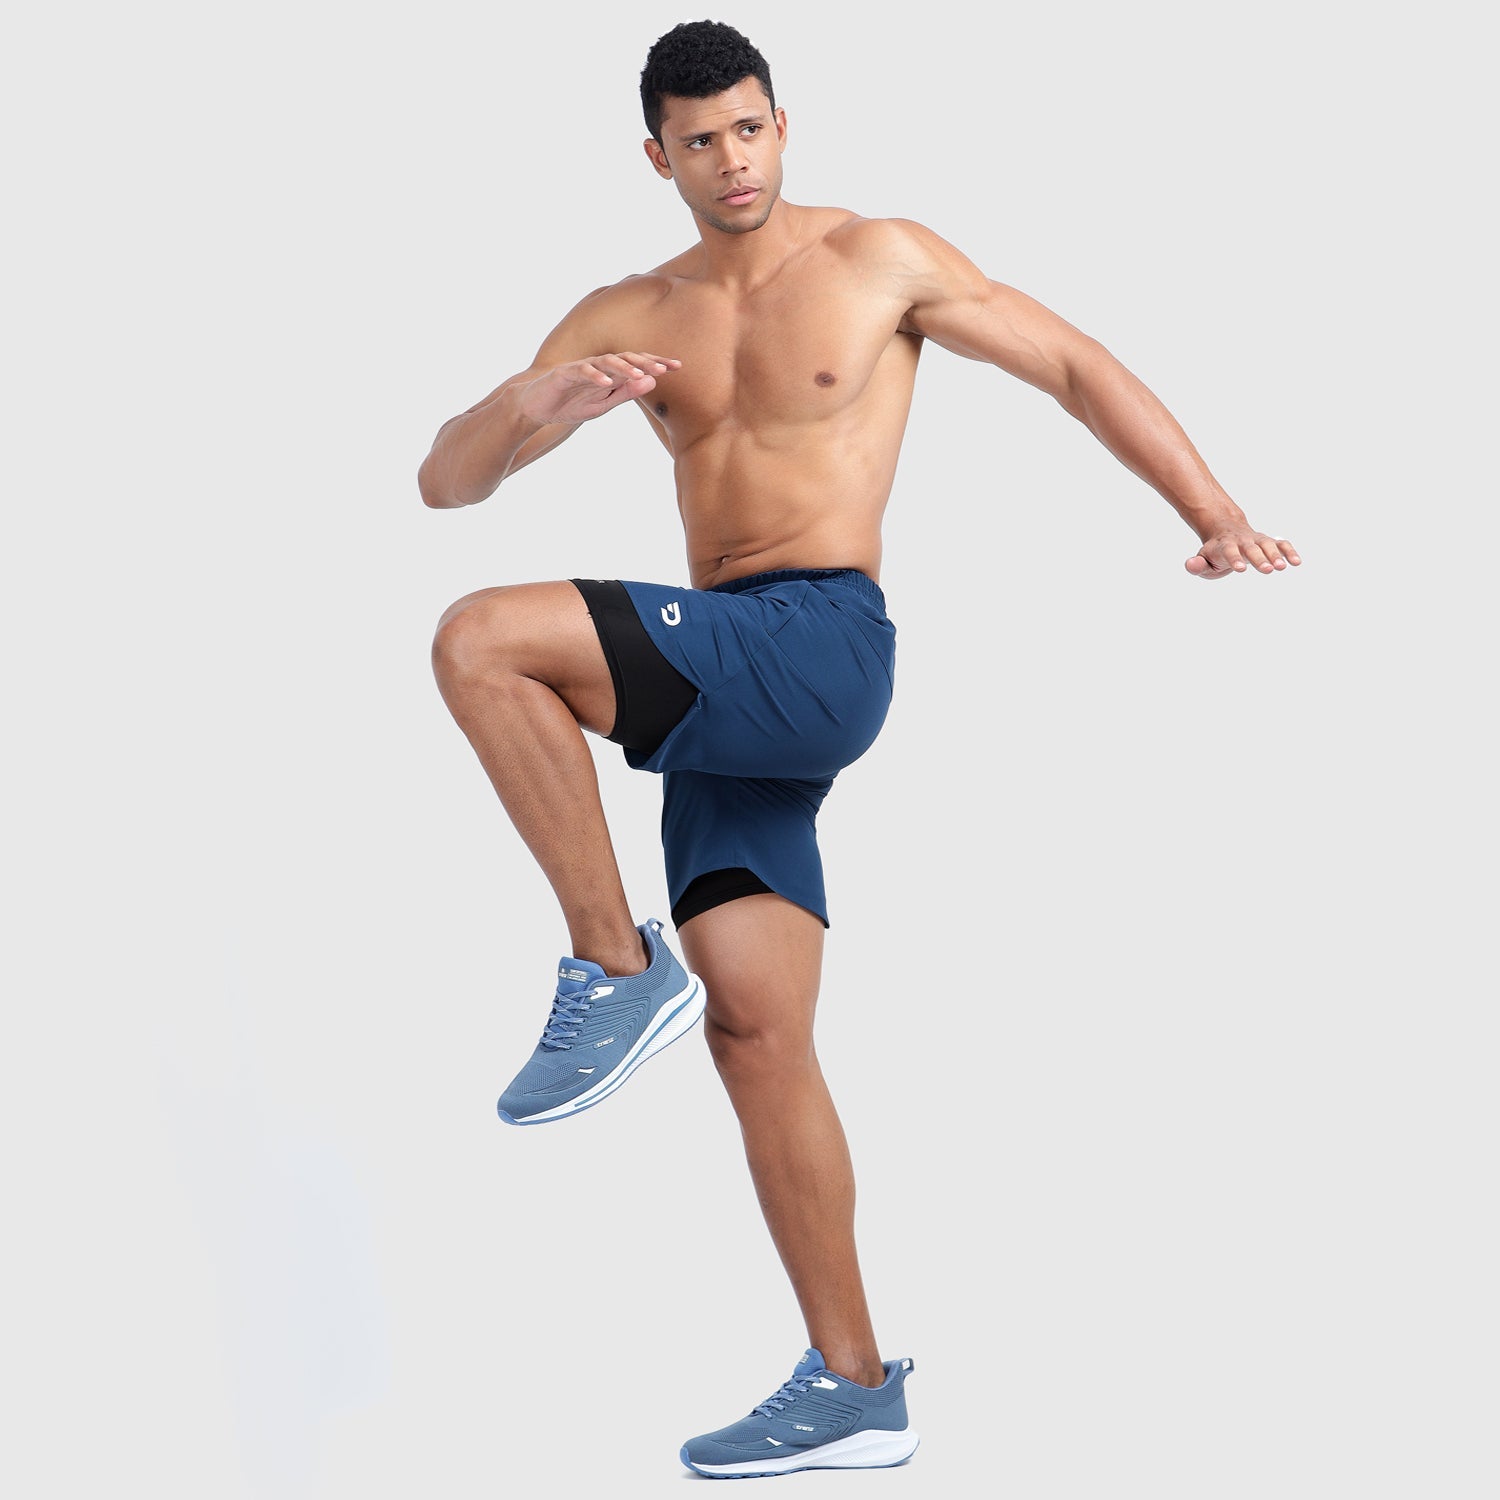 Denmonk's fashionable 2-IN-1 SHORTS regal blue shorts for men will boost your level of gym fitness.